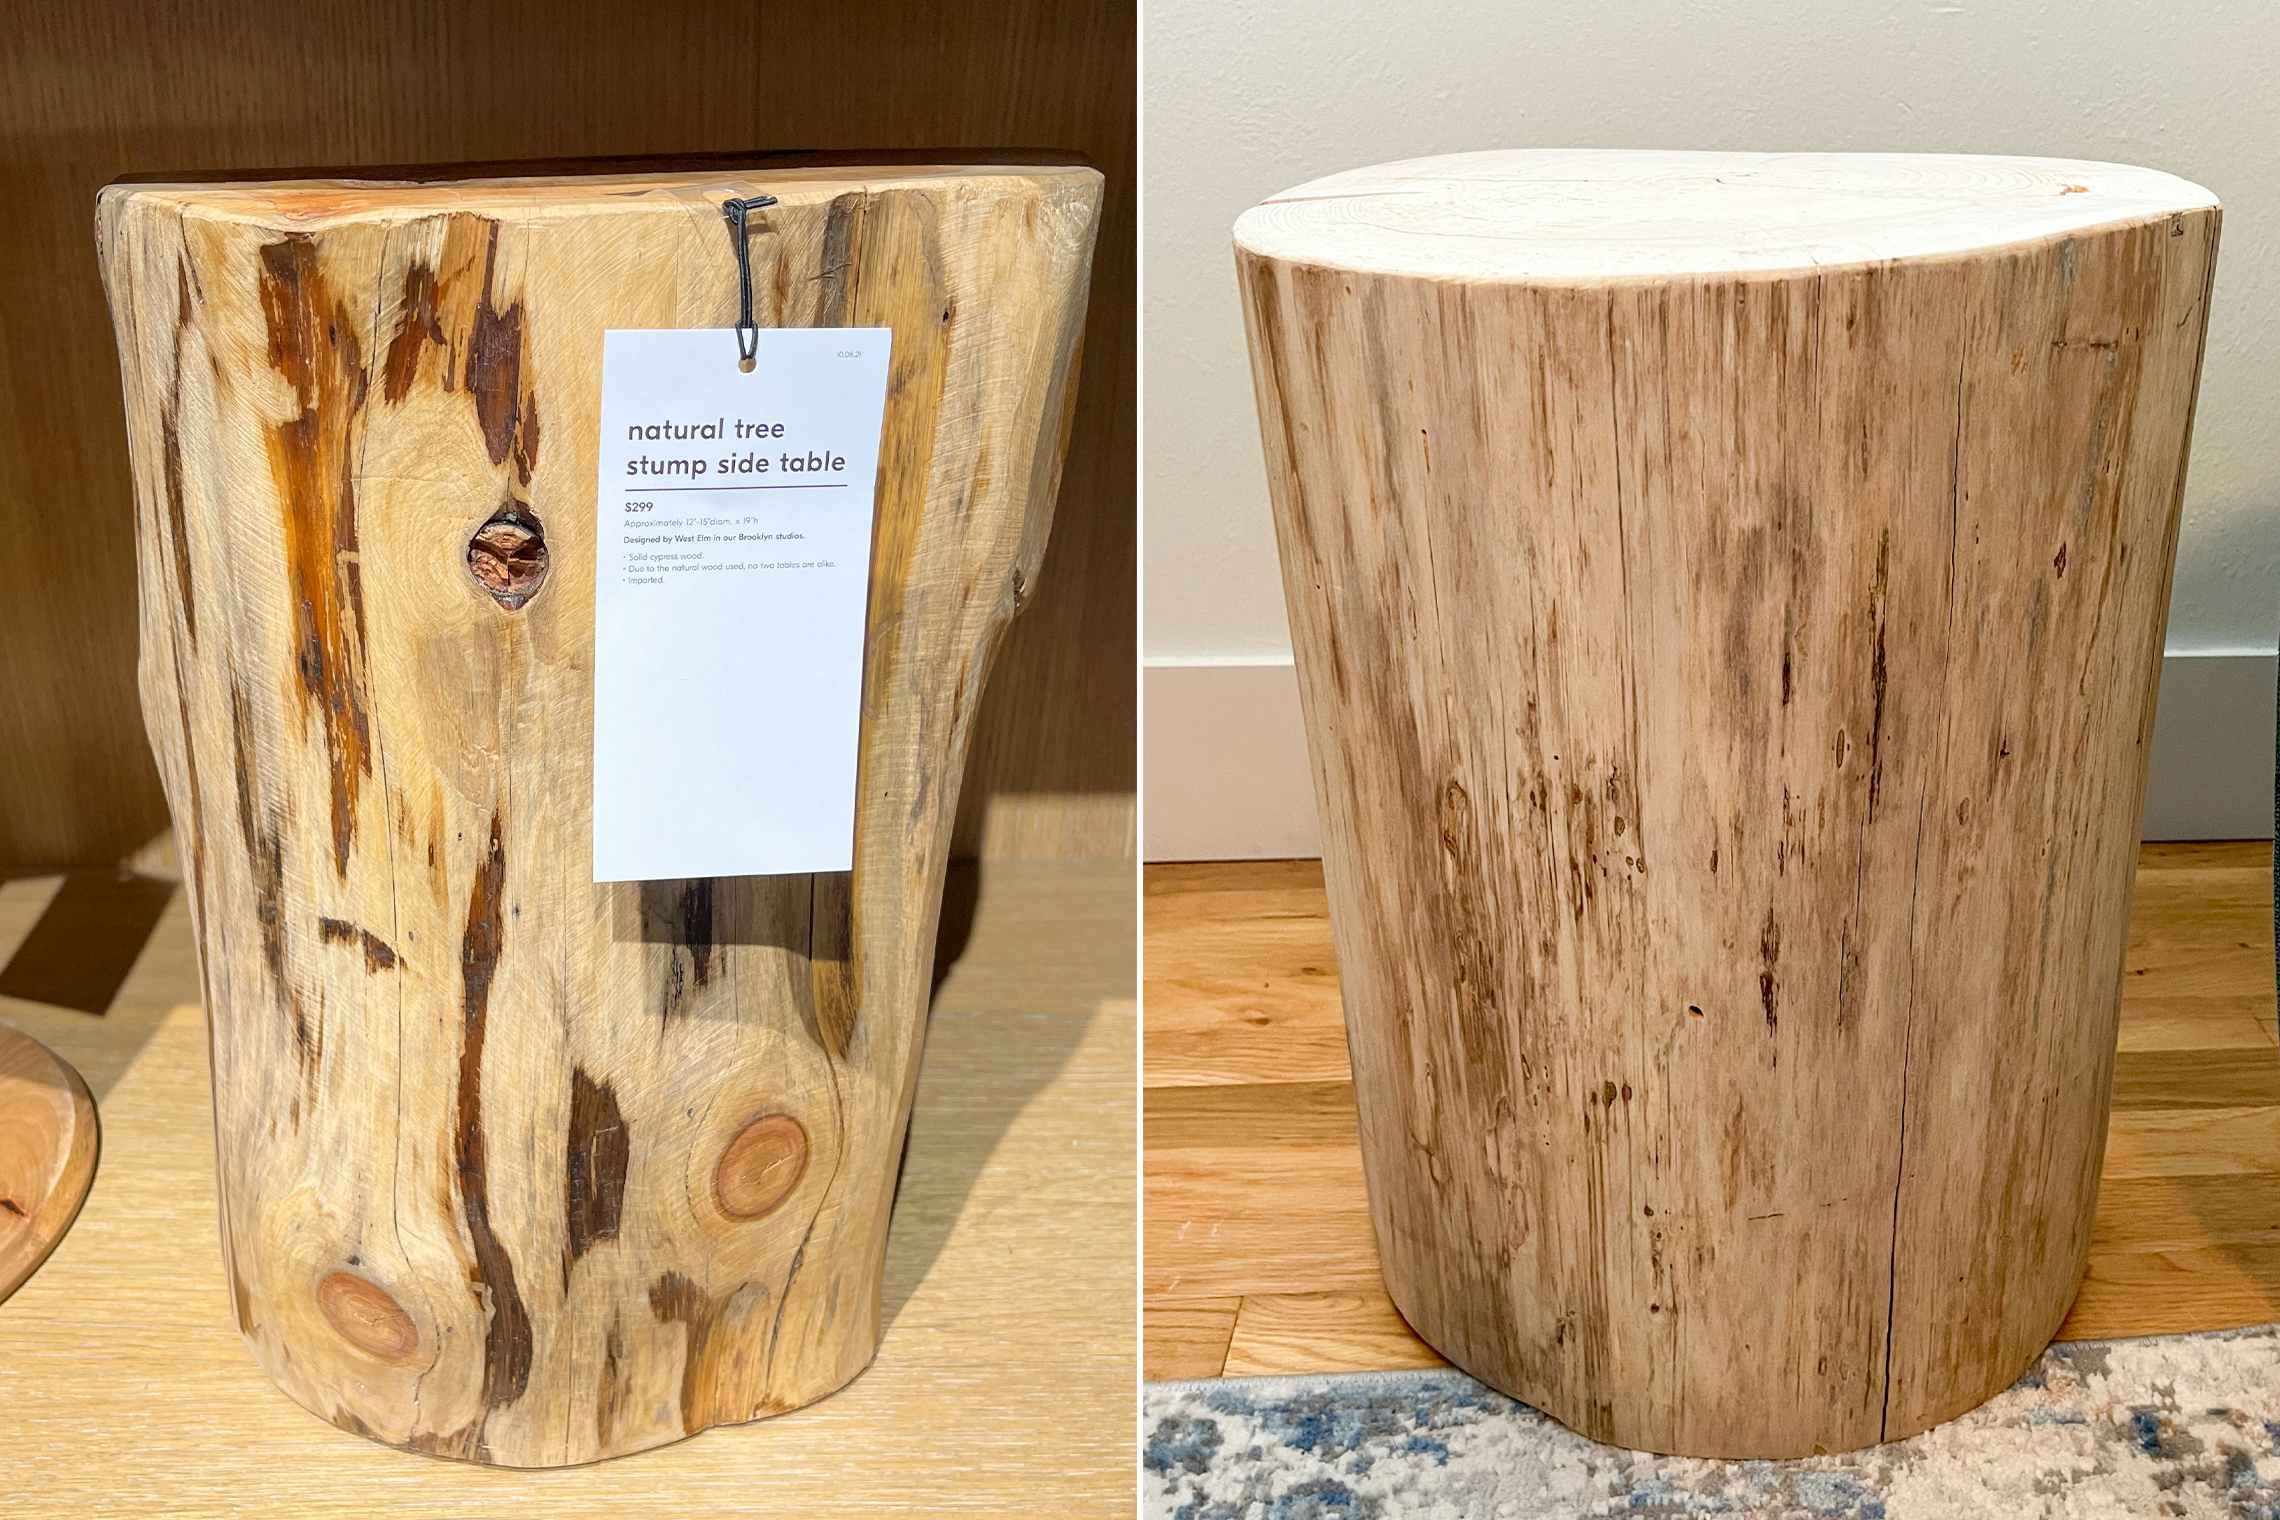 Two wood stump side tables side by side in a photo. One DIY and one from West Elm.